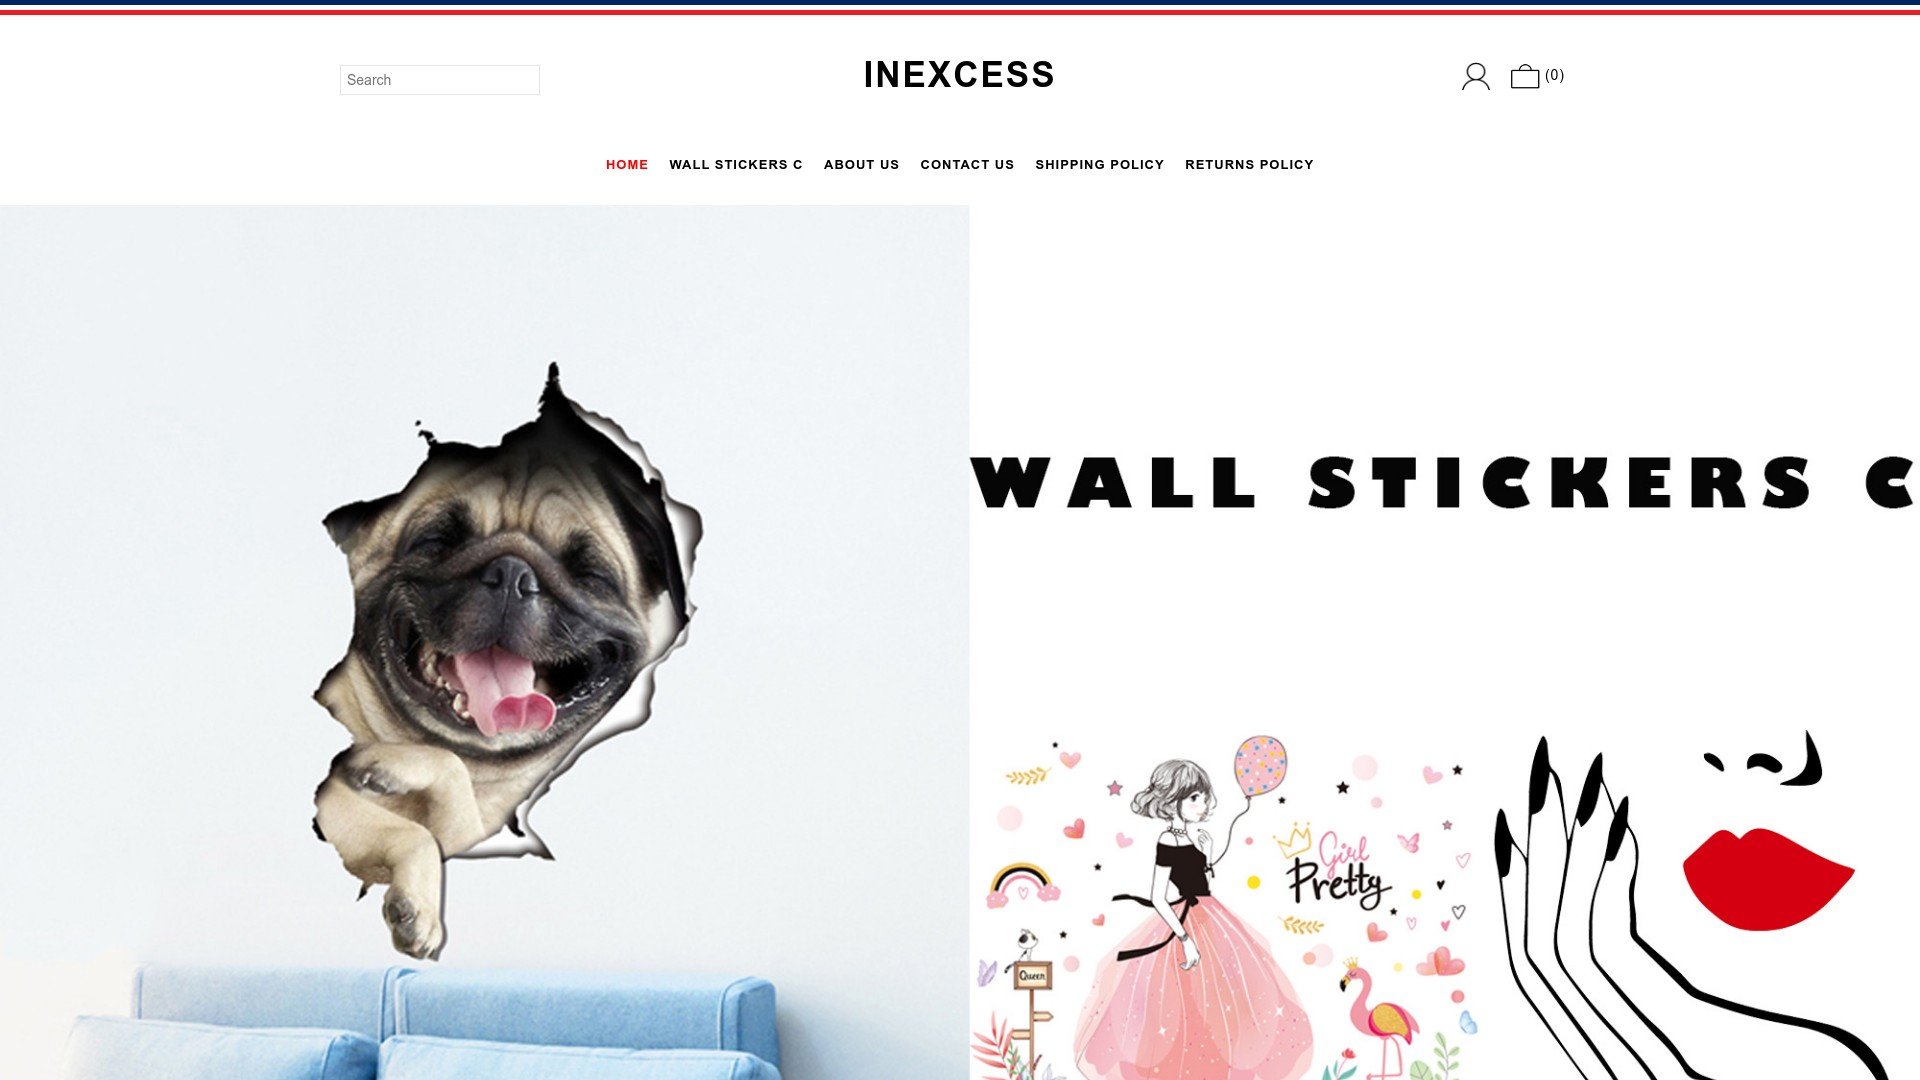 Inexcess Site Store at inexcess.site